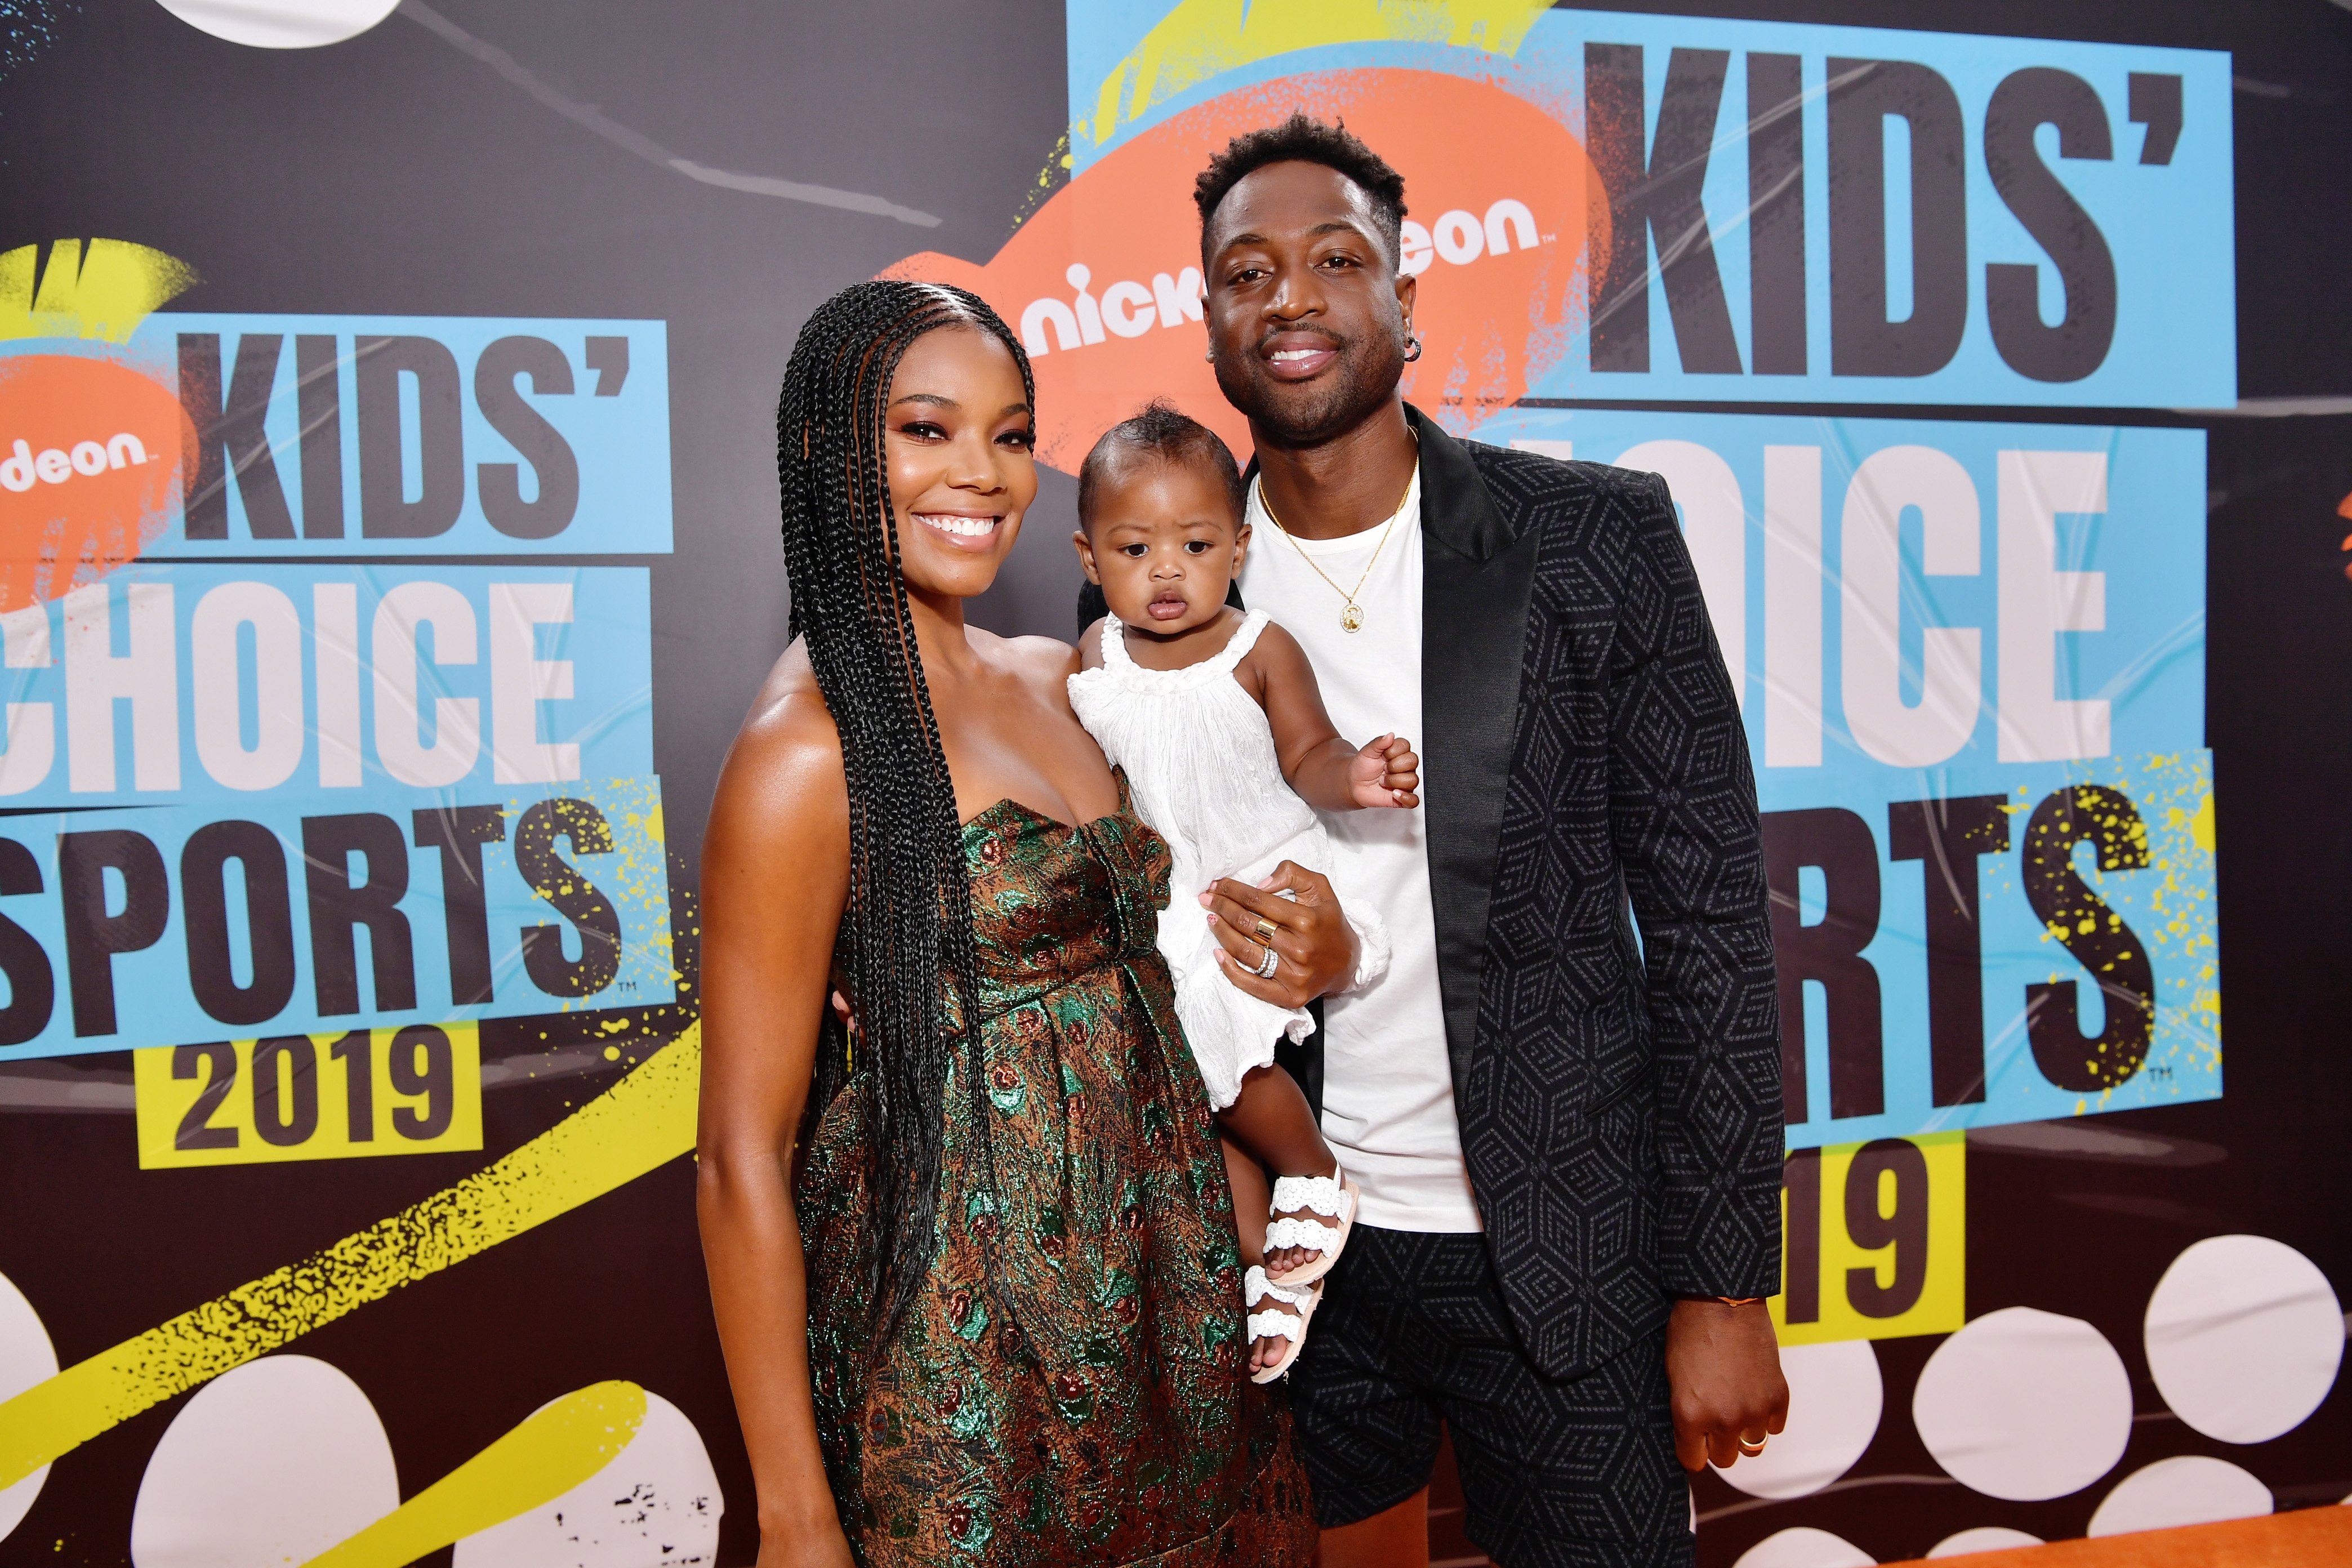 Gabrielle Union and Dwyane Wade with their daughter, Kaavia James attending Nickelodeon Kids' Choice Sports 2019 on July 11, 2019. | Photo: Getty Images